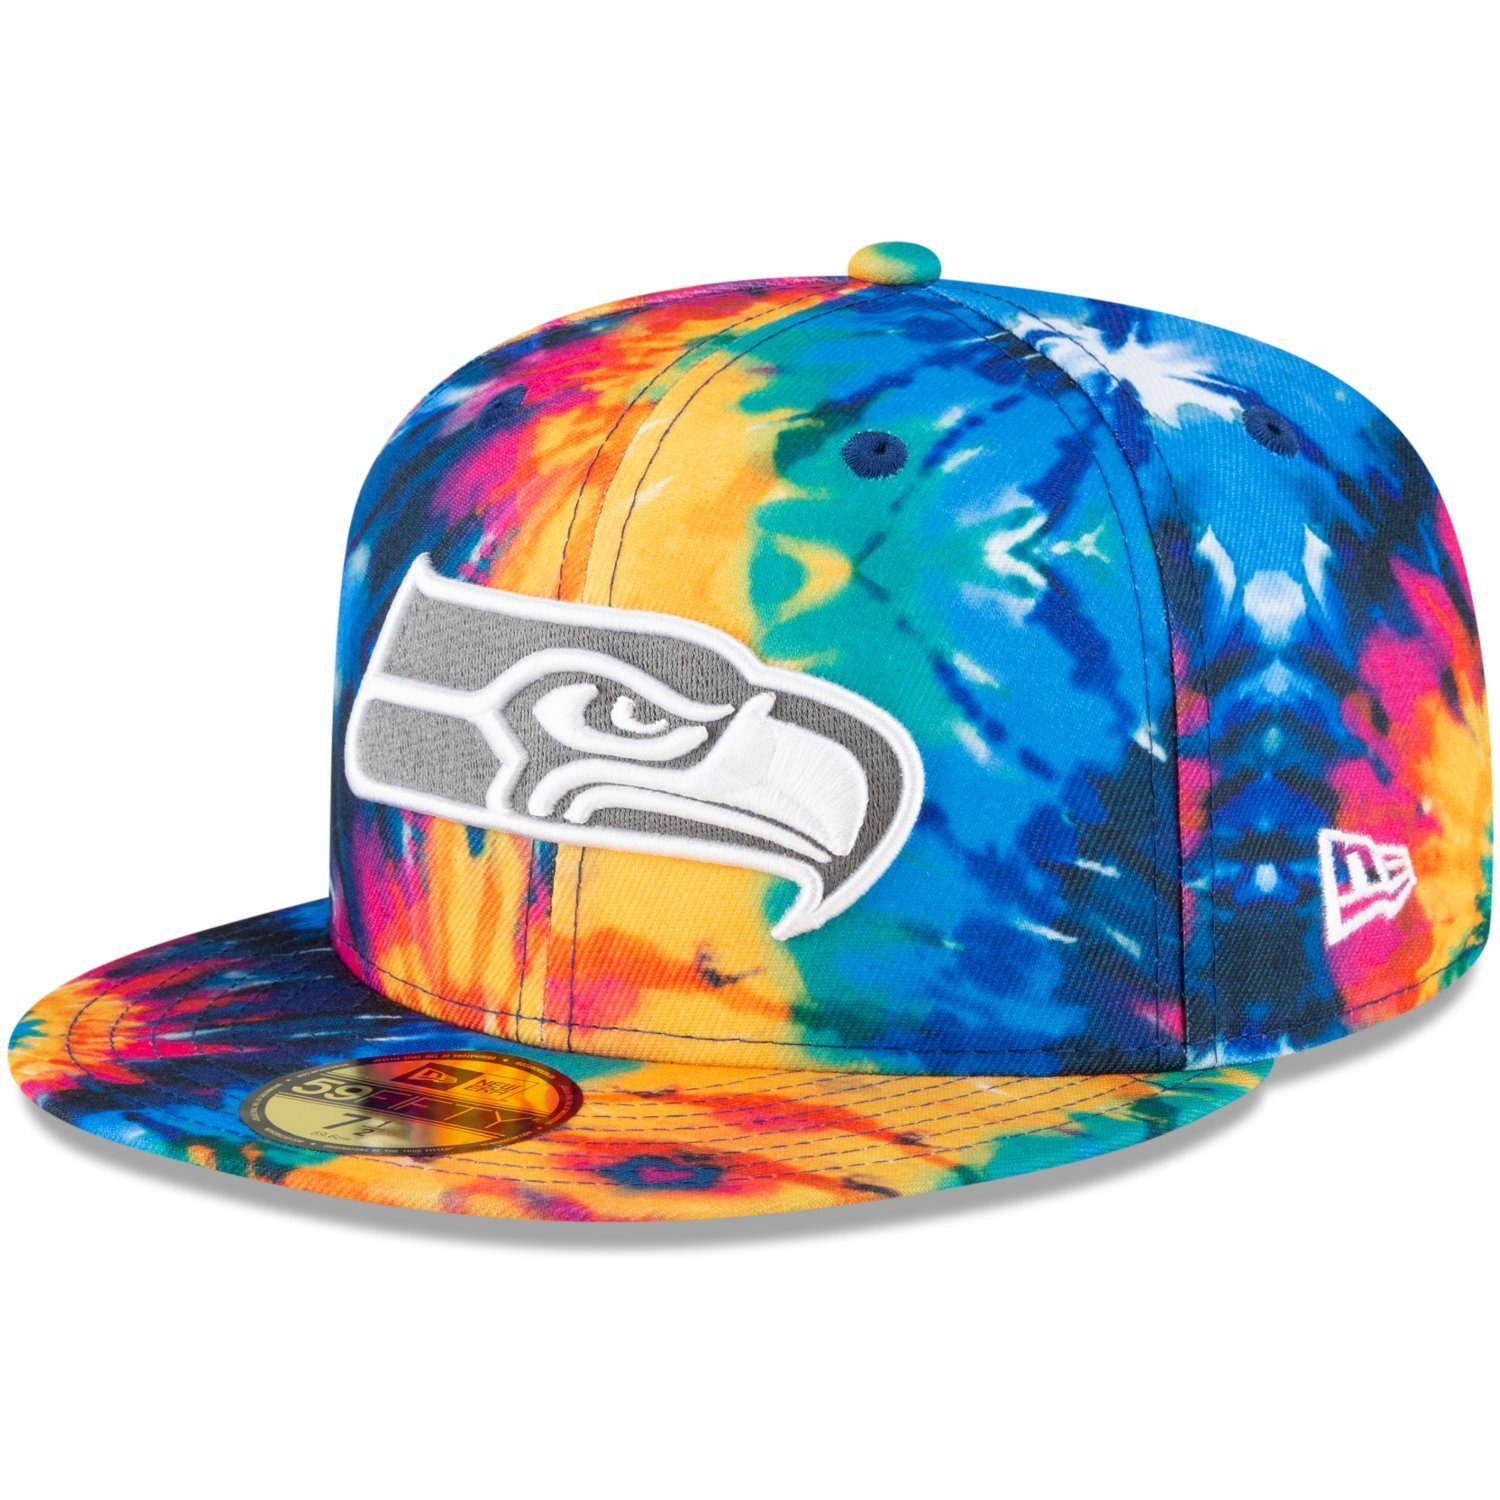 New Era Fitted Cap 59Fifty CRUCIAL CATCH NFL Teams Seattle Seahawks